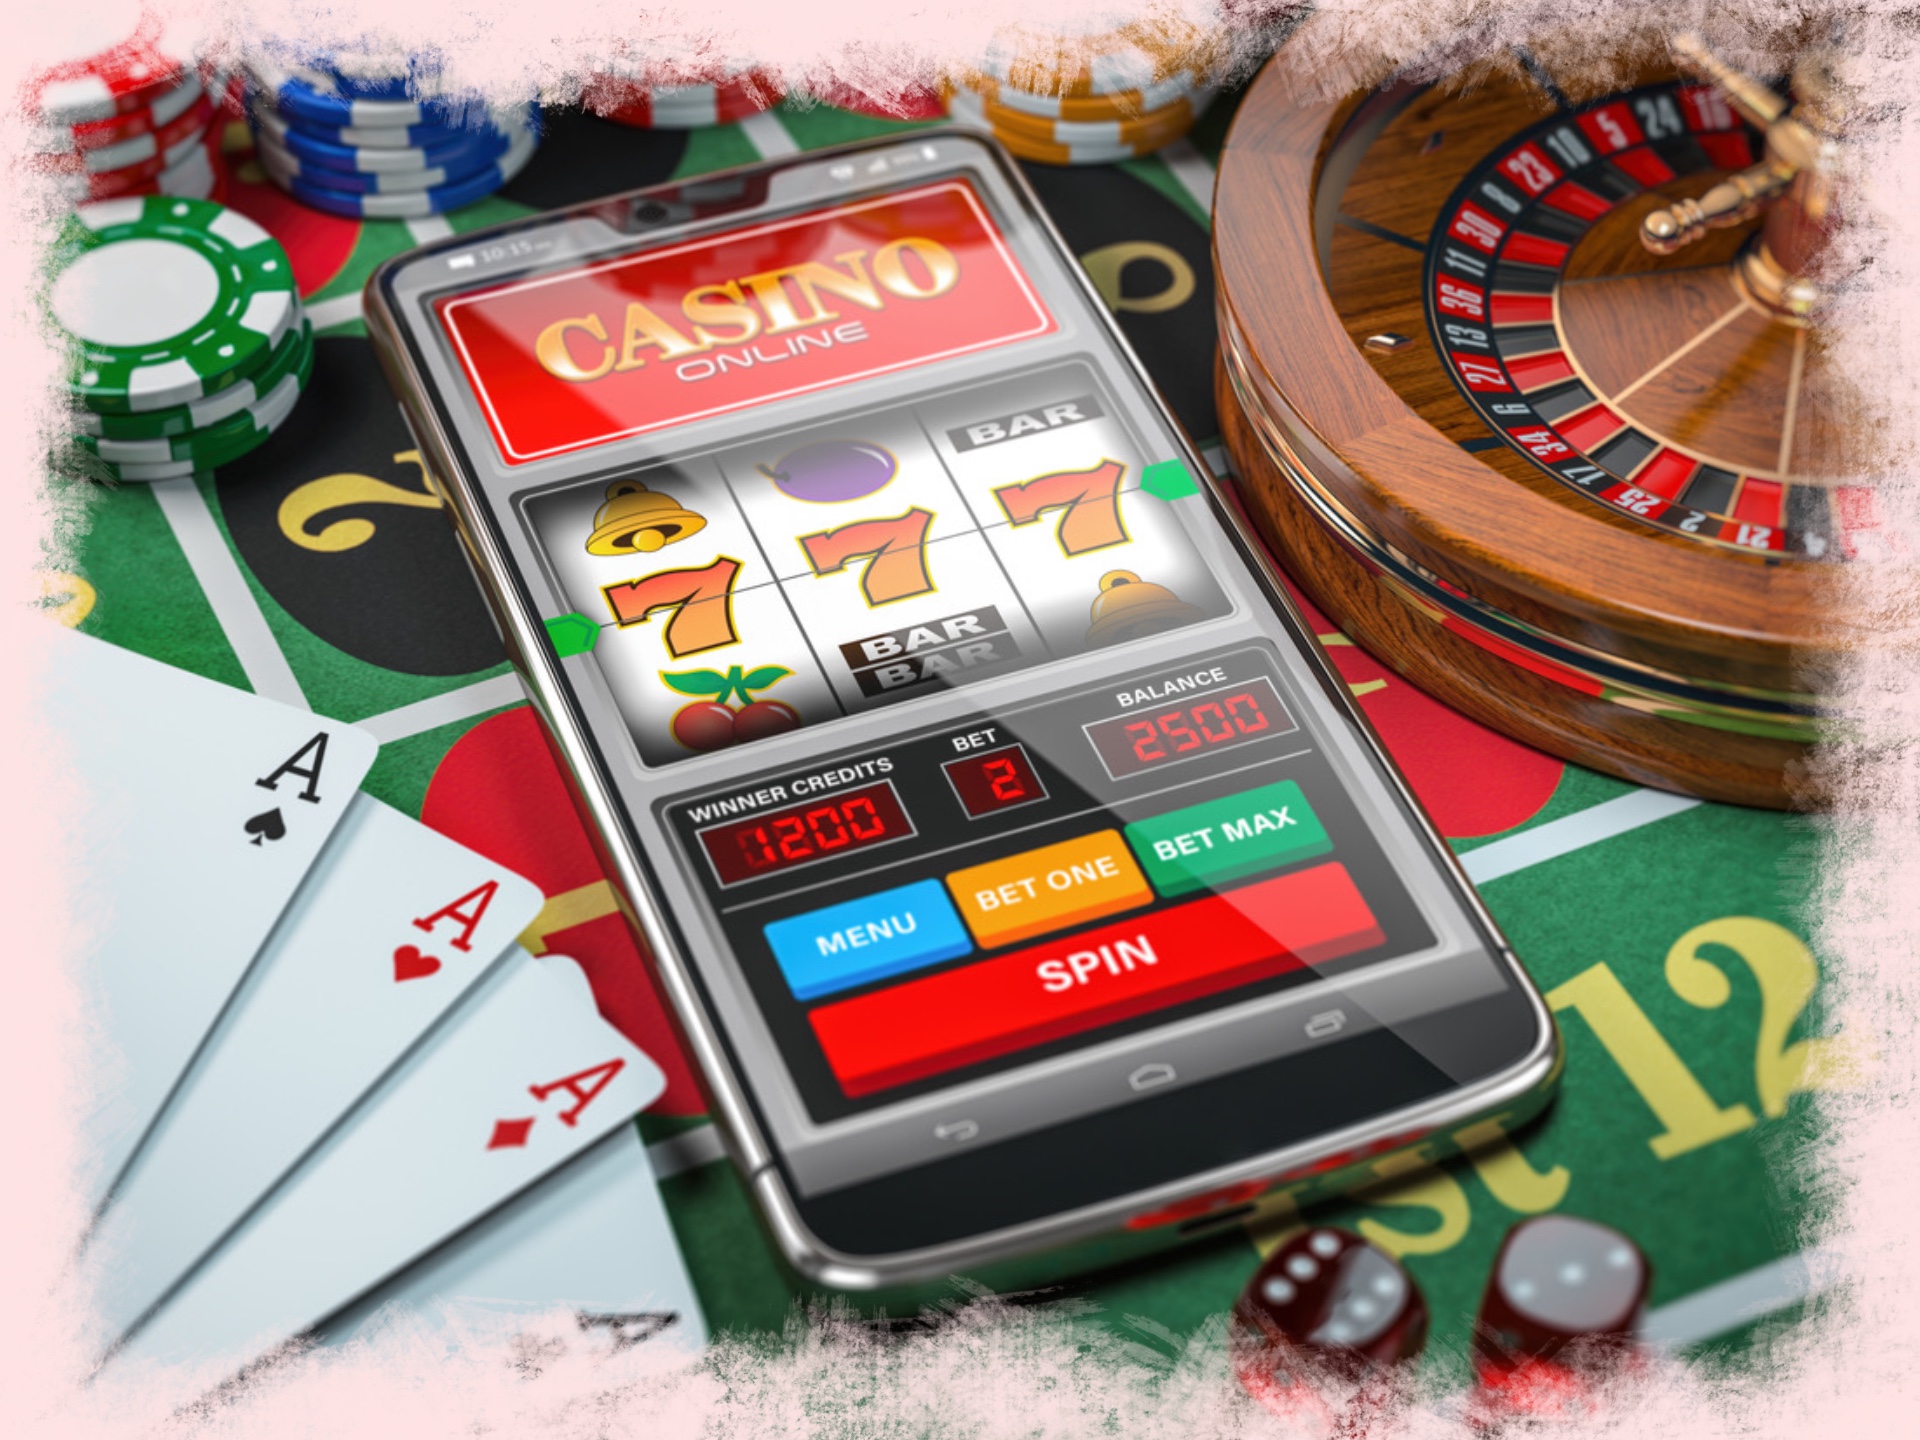 Mobile casino is more convenient to use as you can take it with you and play games whenever you want.